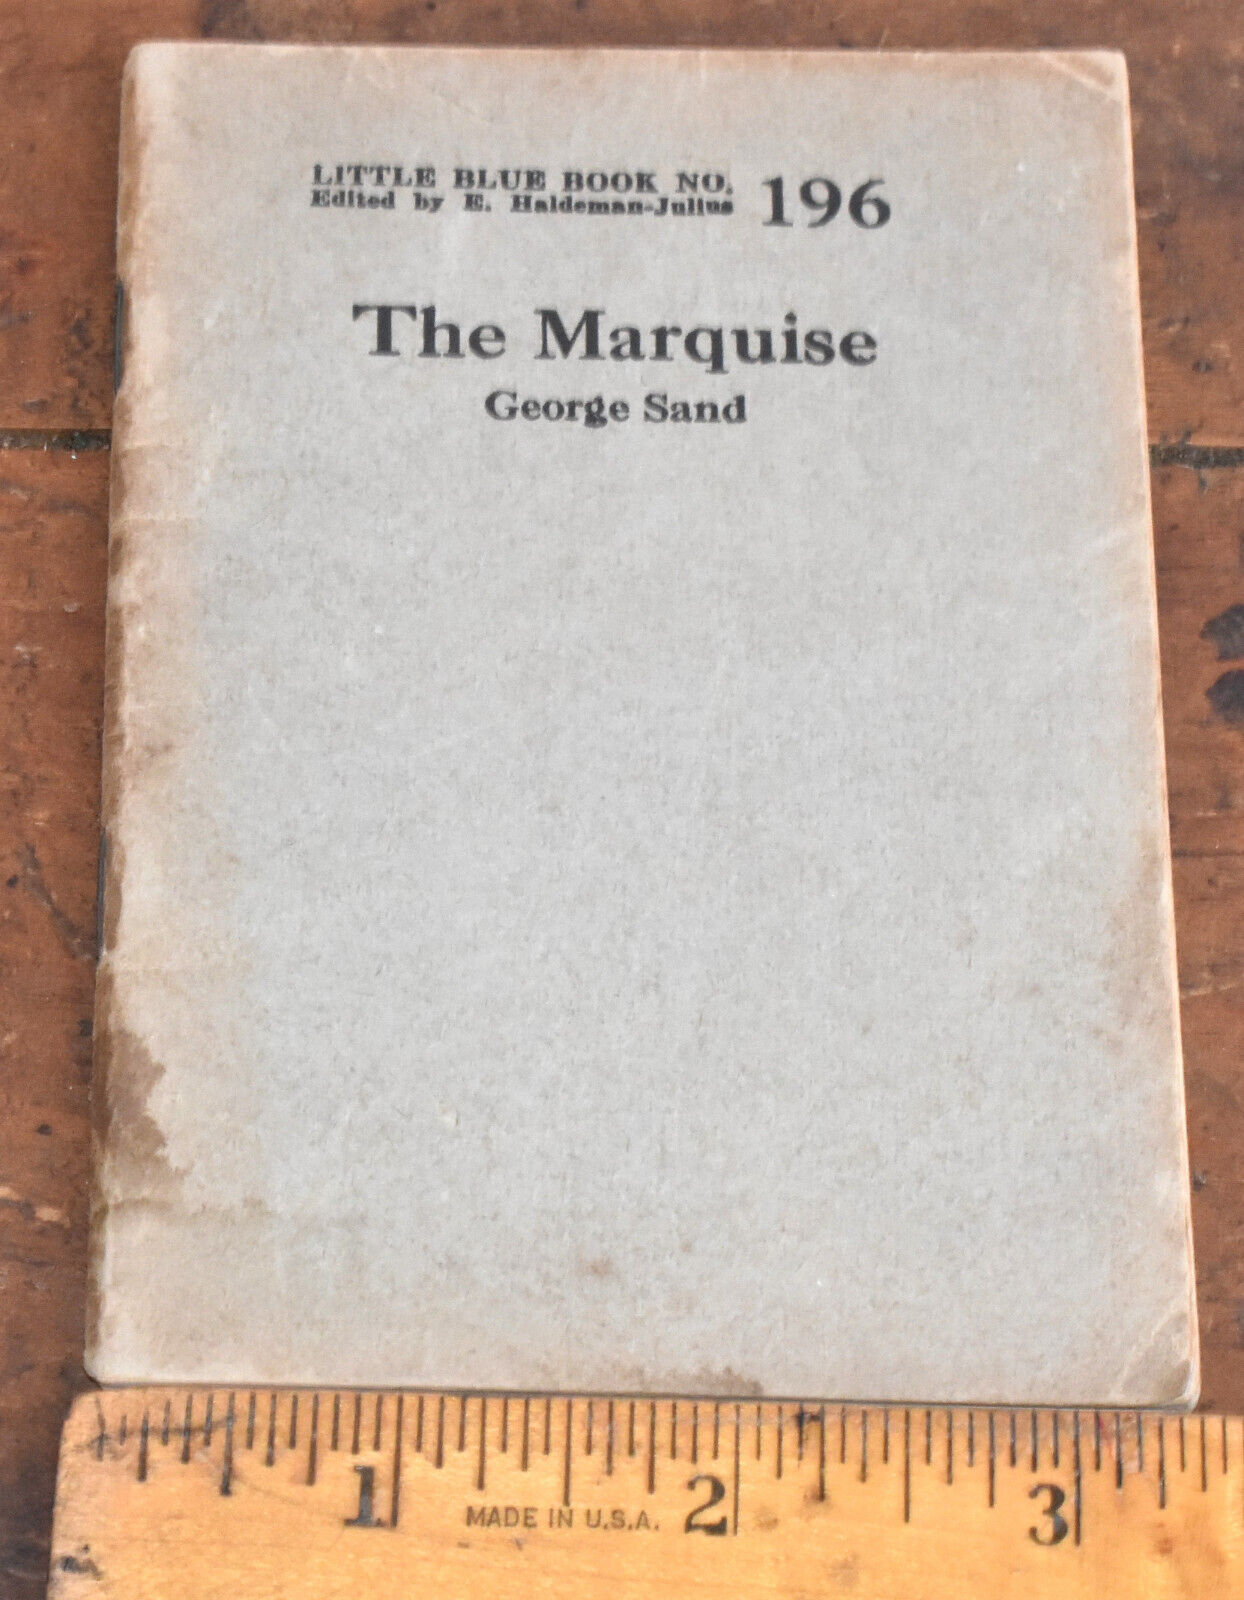 Vintage Little Blue Book No. 196 The Marquise by George Sand